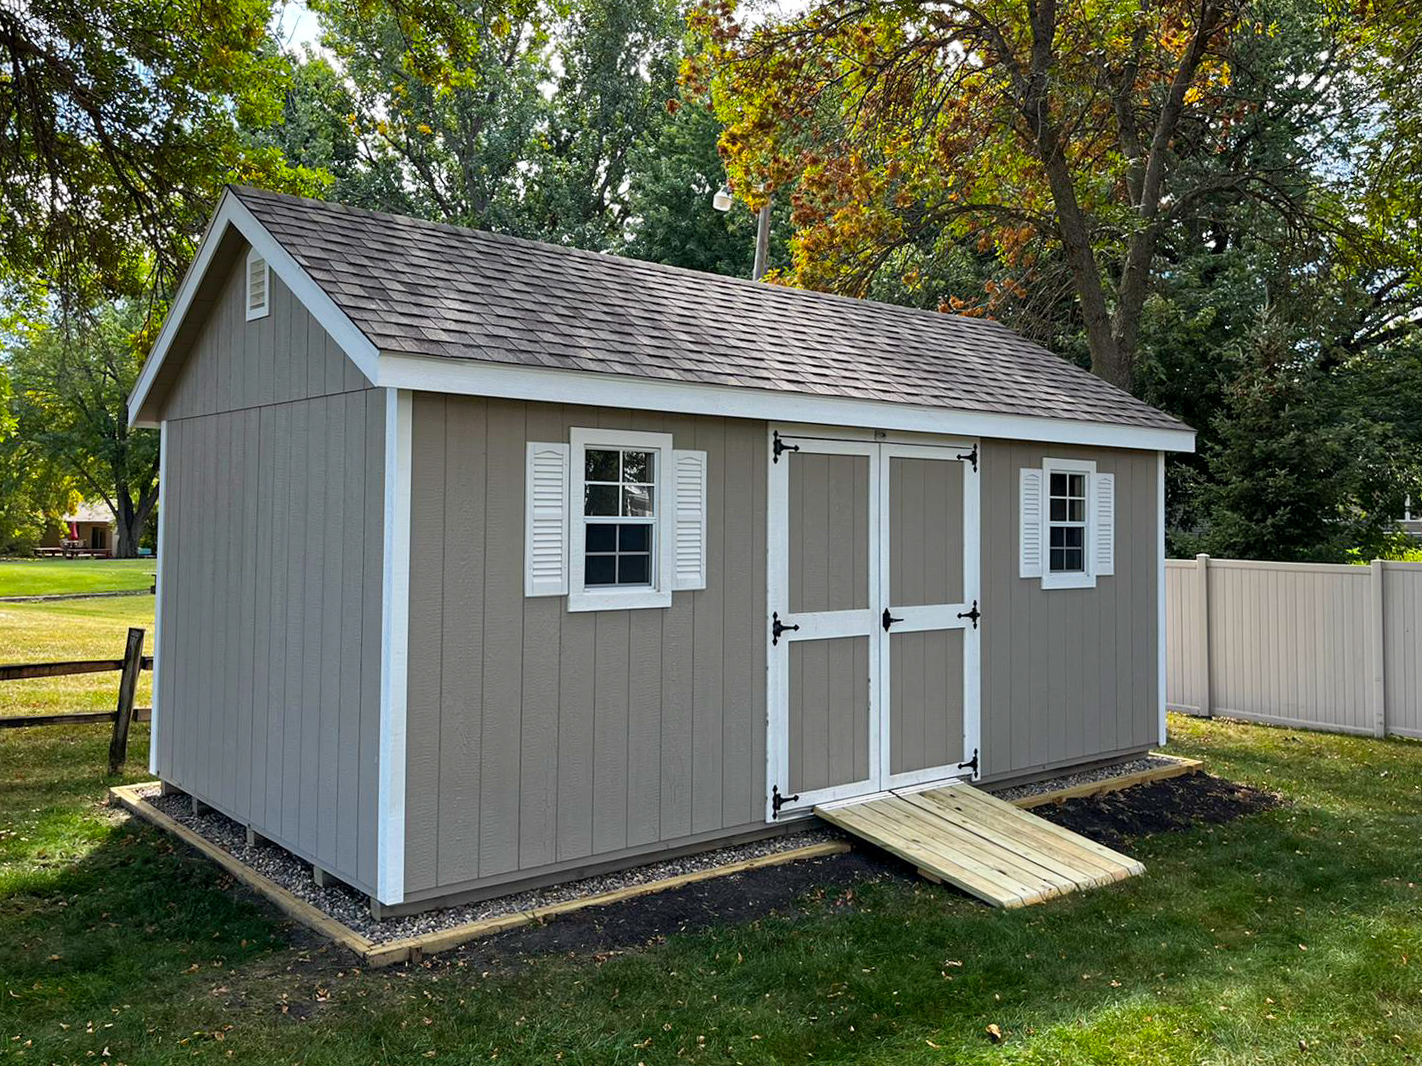 wooden storage sheds for sale in the upper midwest